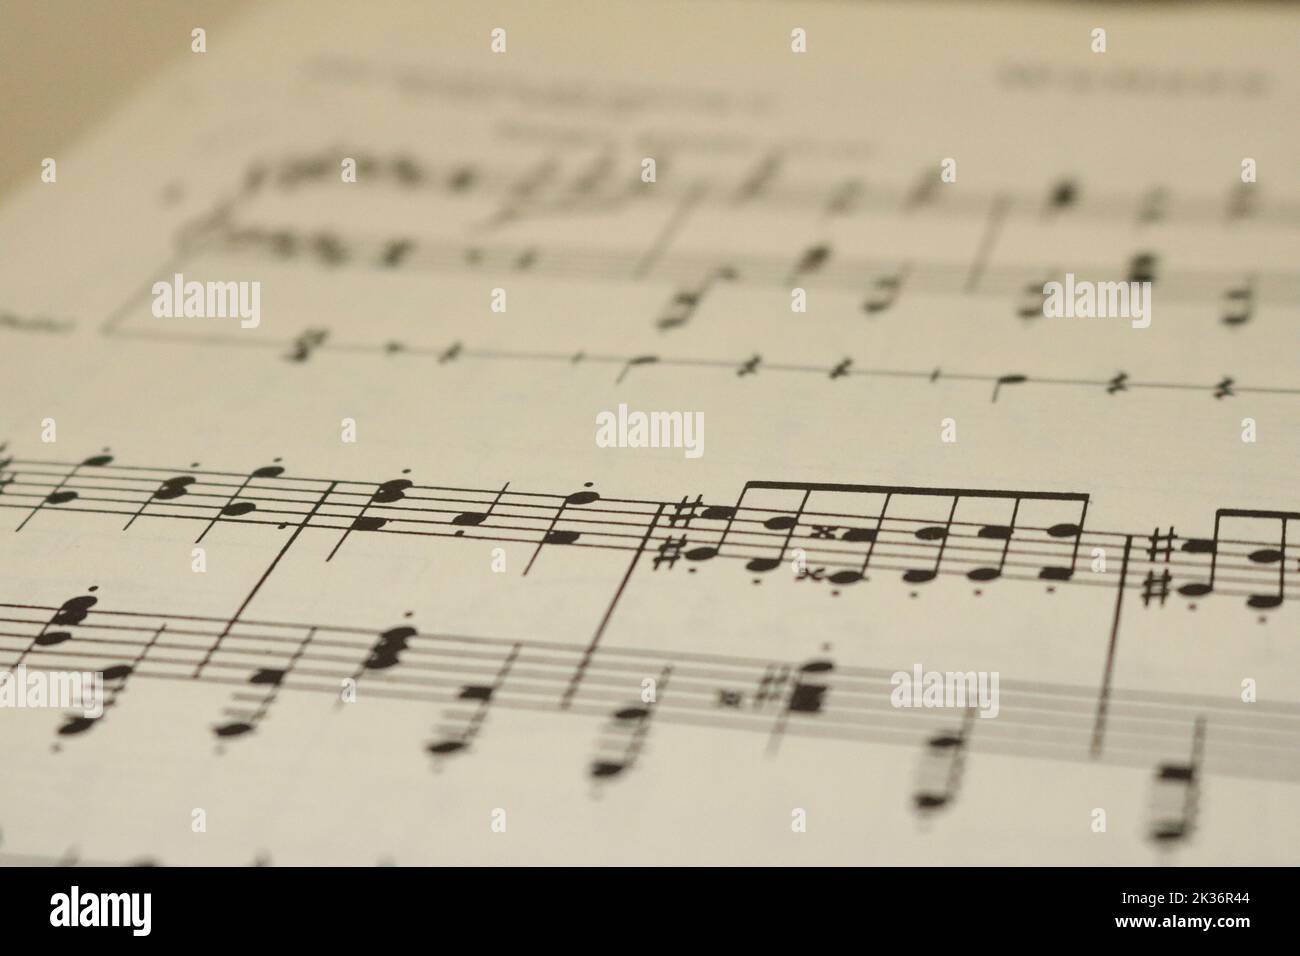 Brahms Op.39 Waltzes sheet music for the piano. Stock Photo